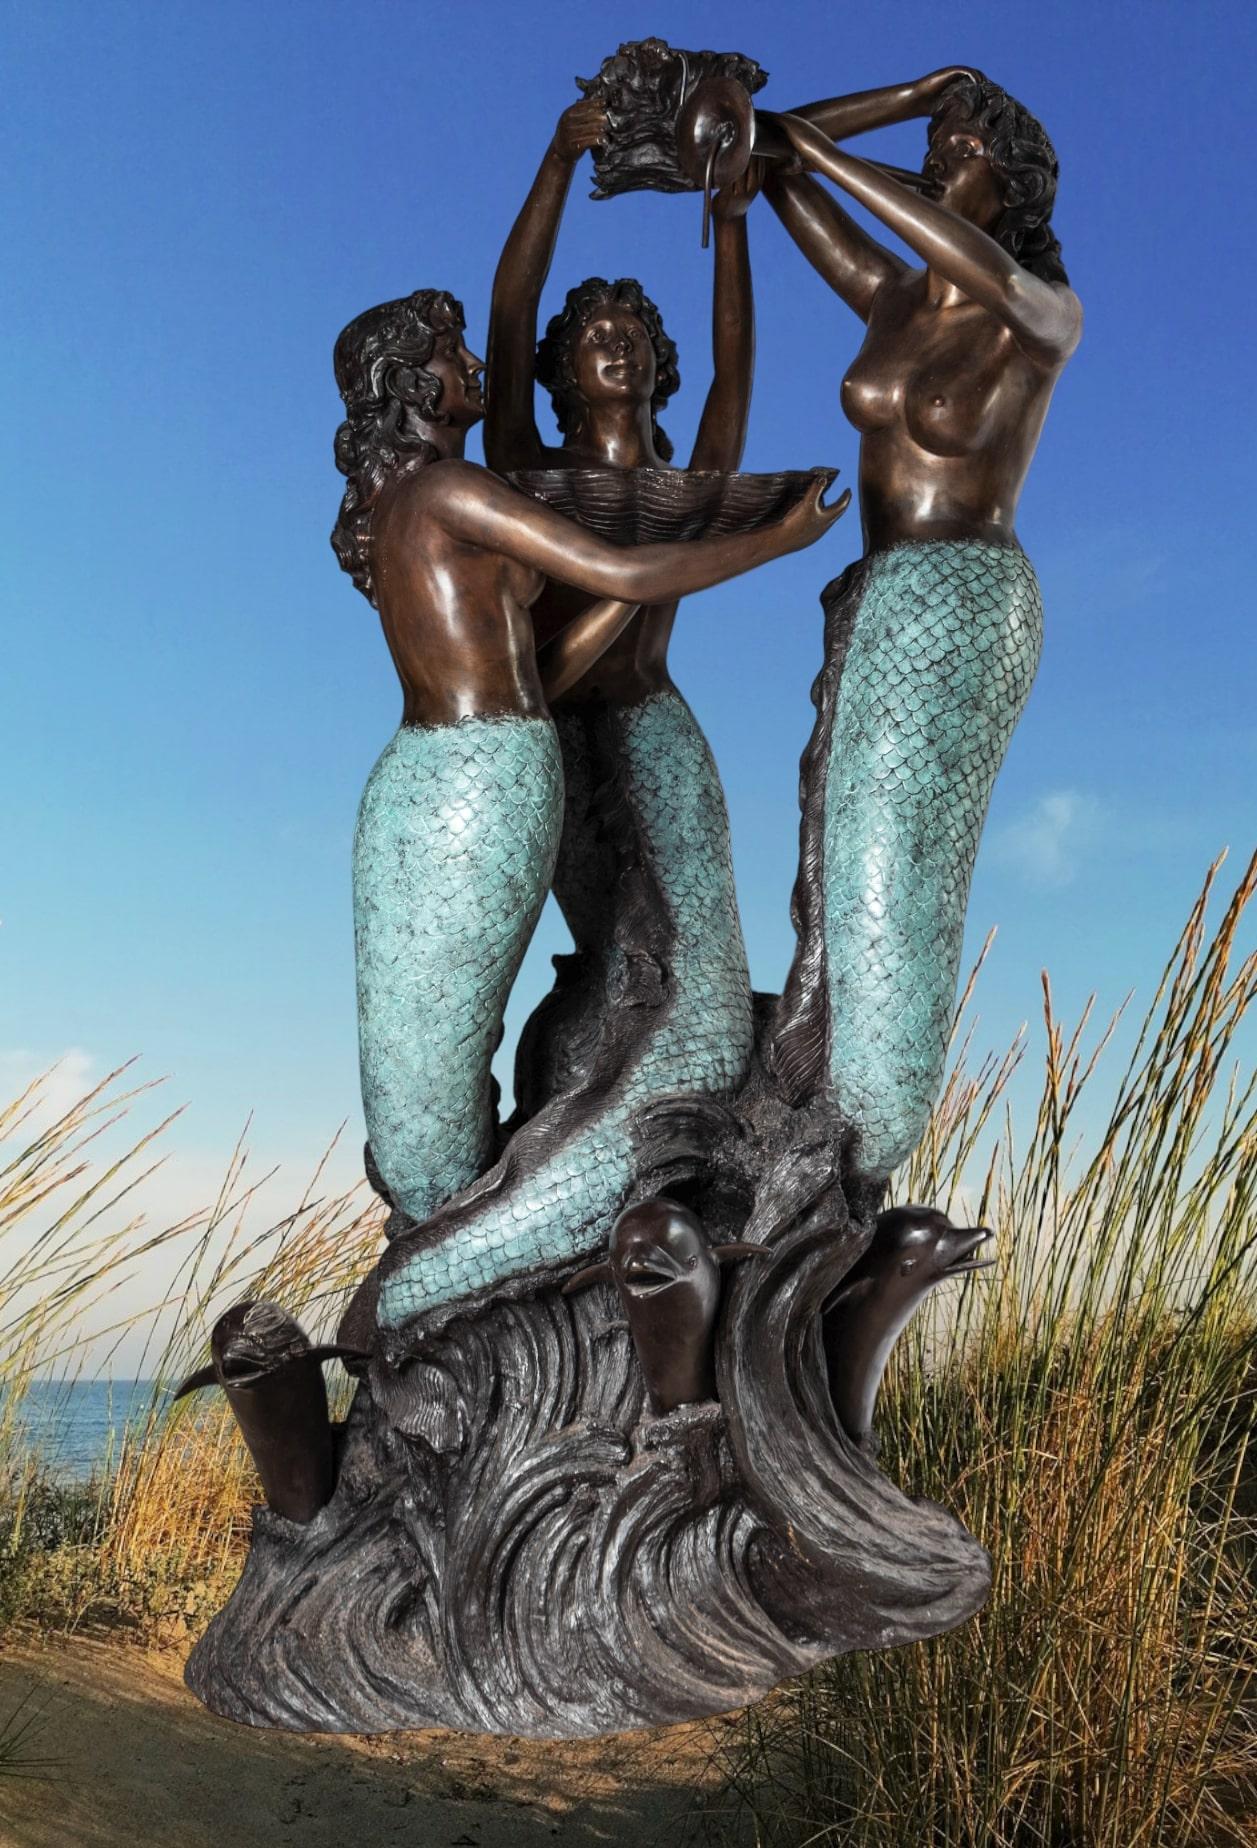 Monumental bronze water fountain depicting three mermaids above the waves surrounded by leaping dolphins. A large shell held by one of the mermaids catches the water from above and returns it to the body of water the statue is (will be) located. In